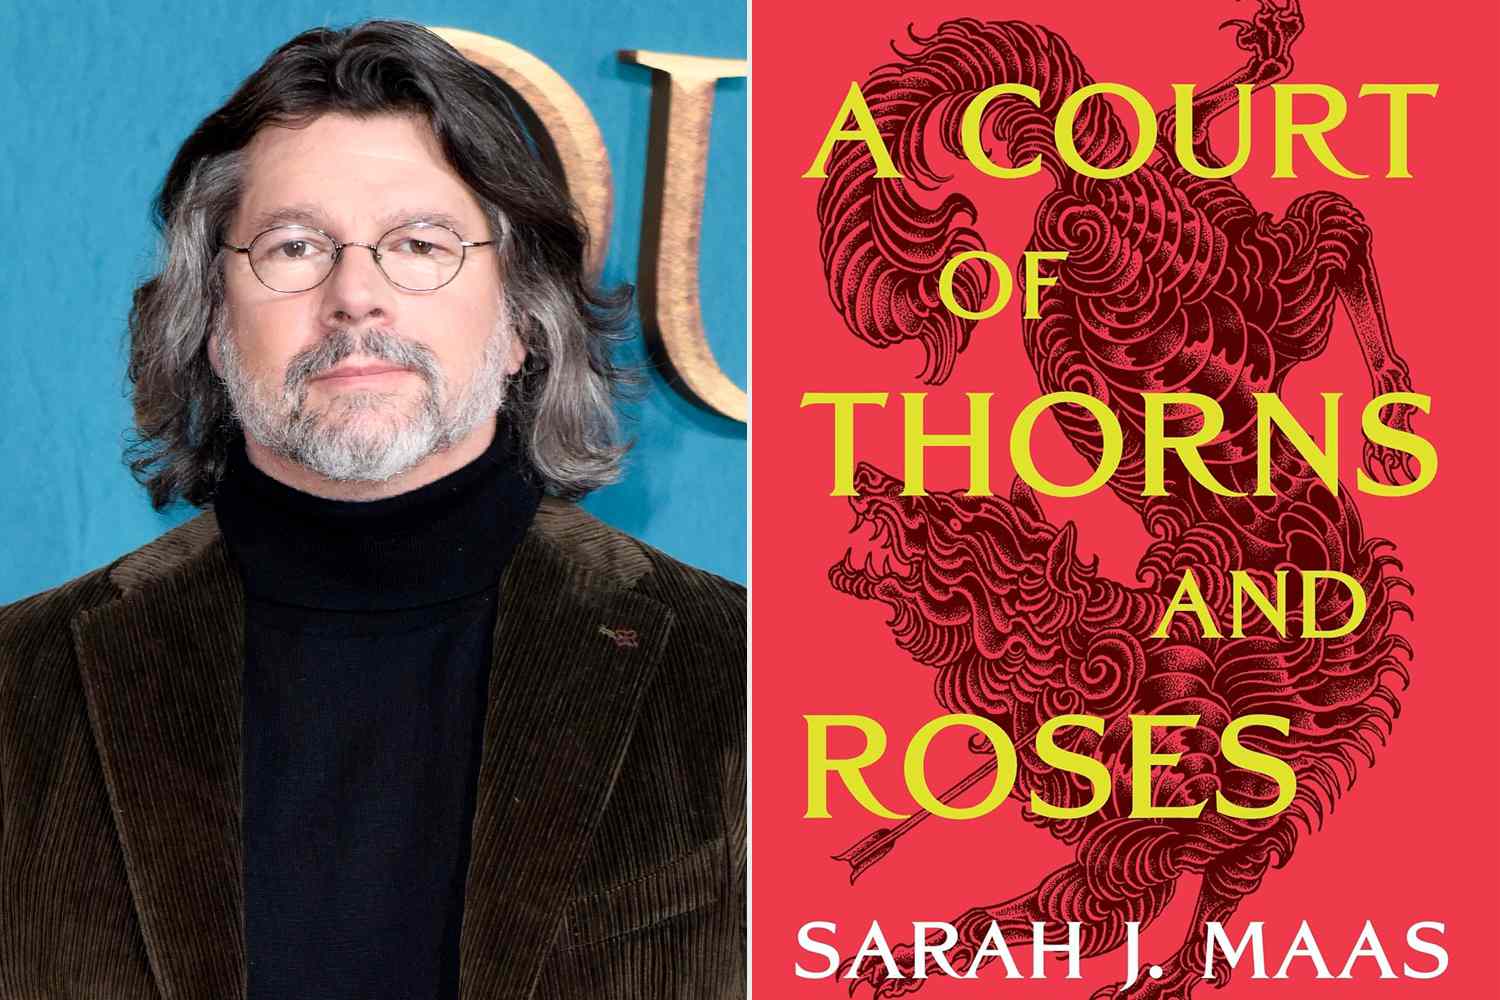 Ronald D. Moore says he's 'no longer' showrunner of 'A Court of Thorns and Roses' TV series